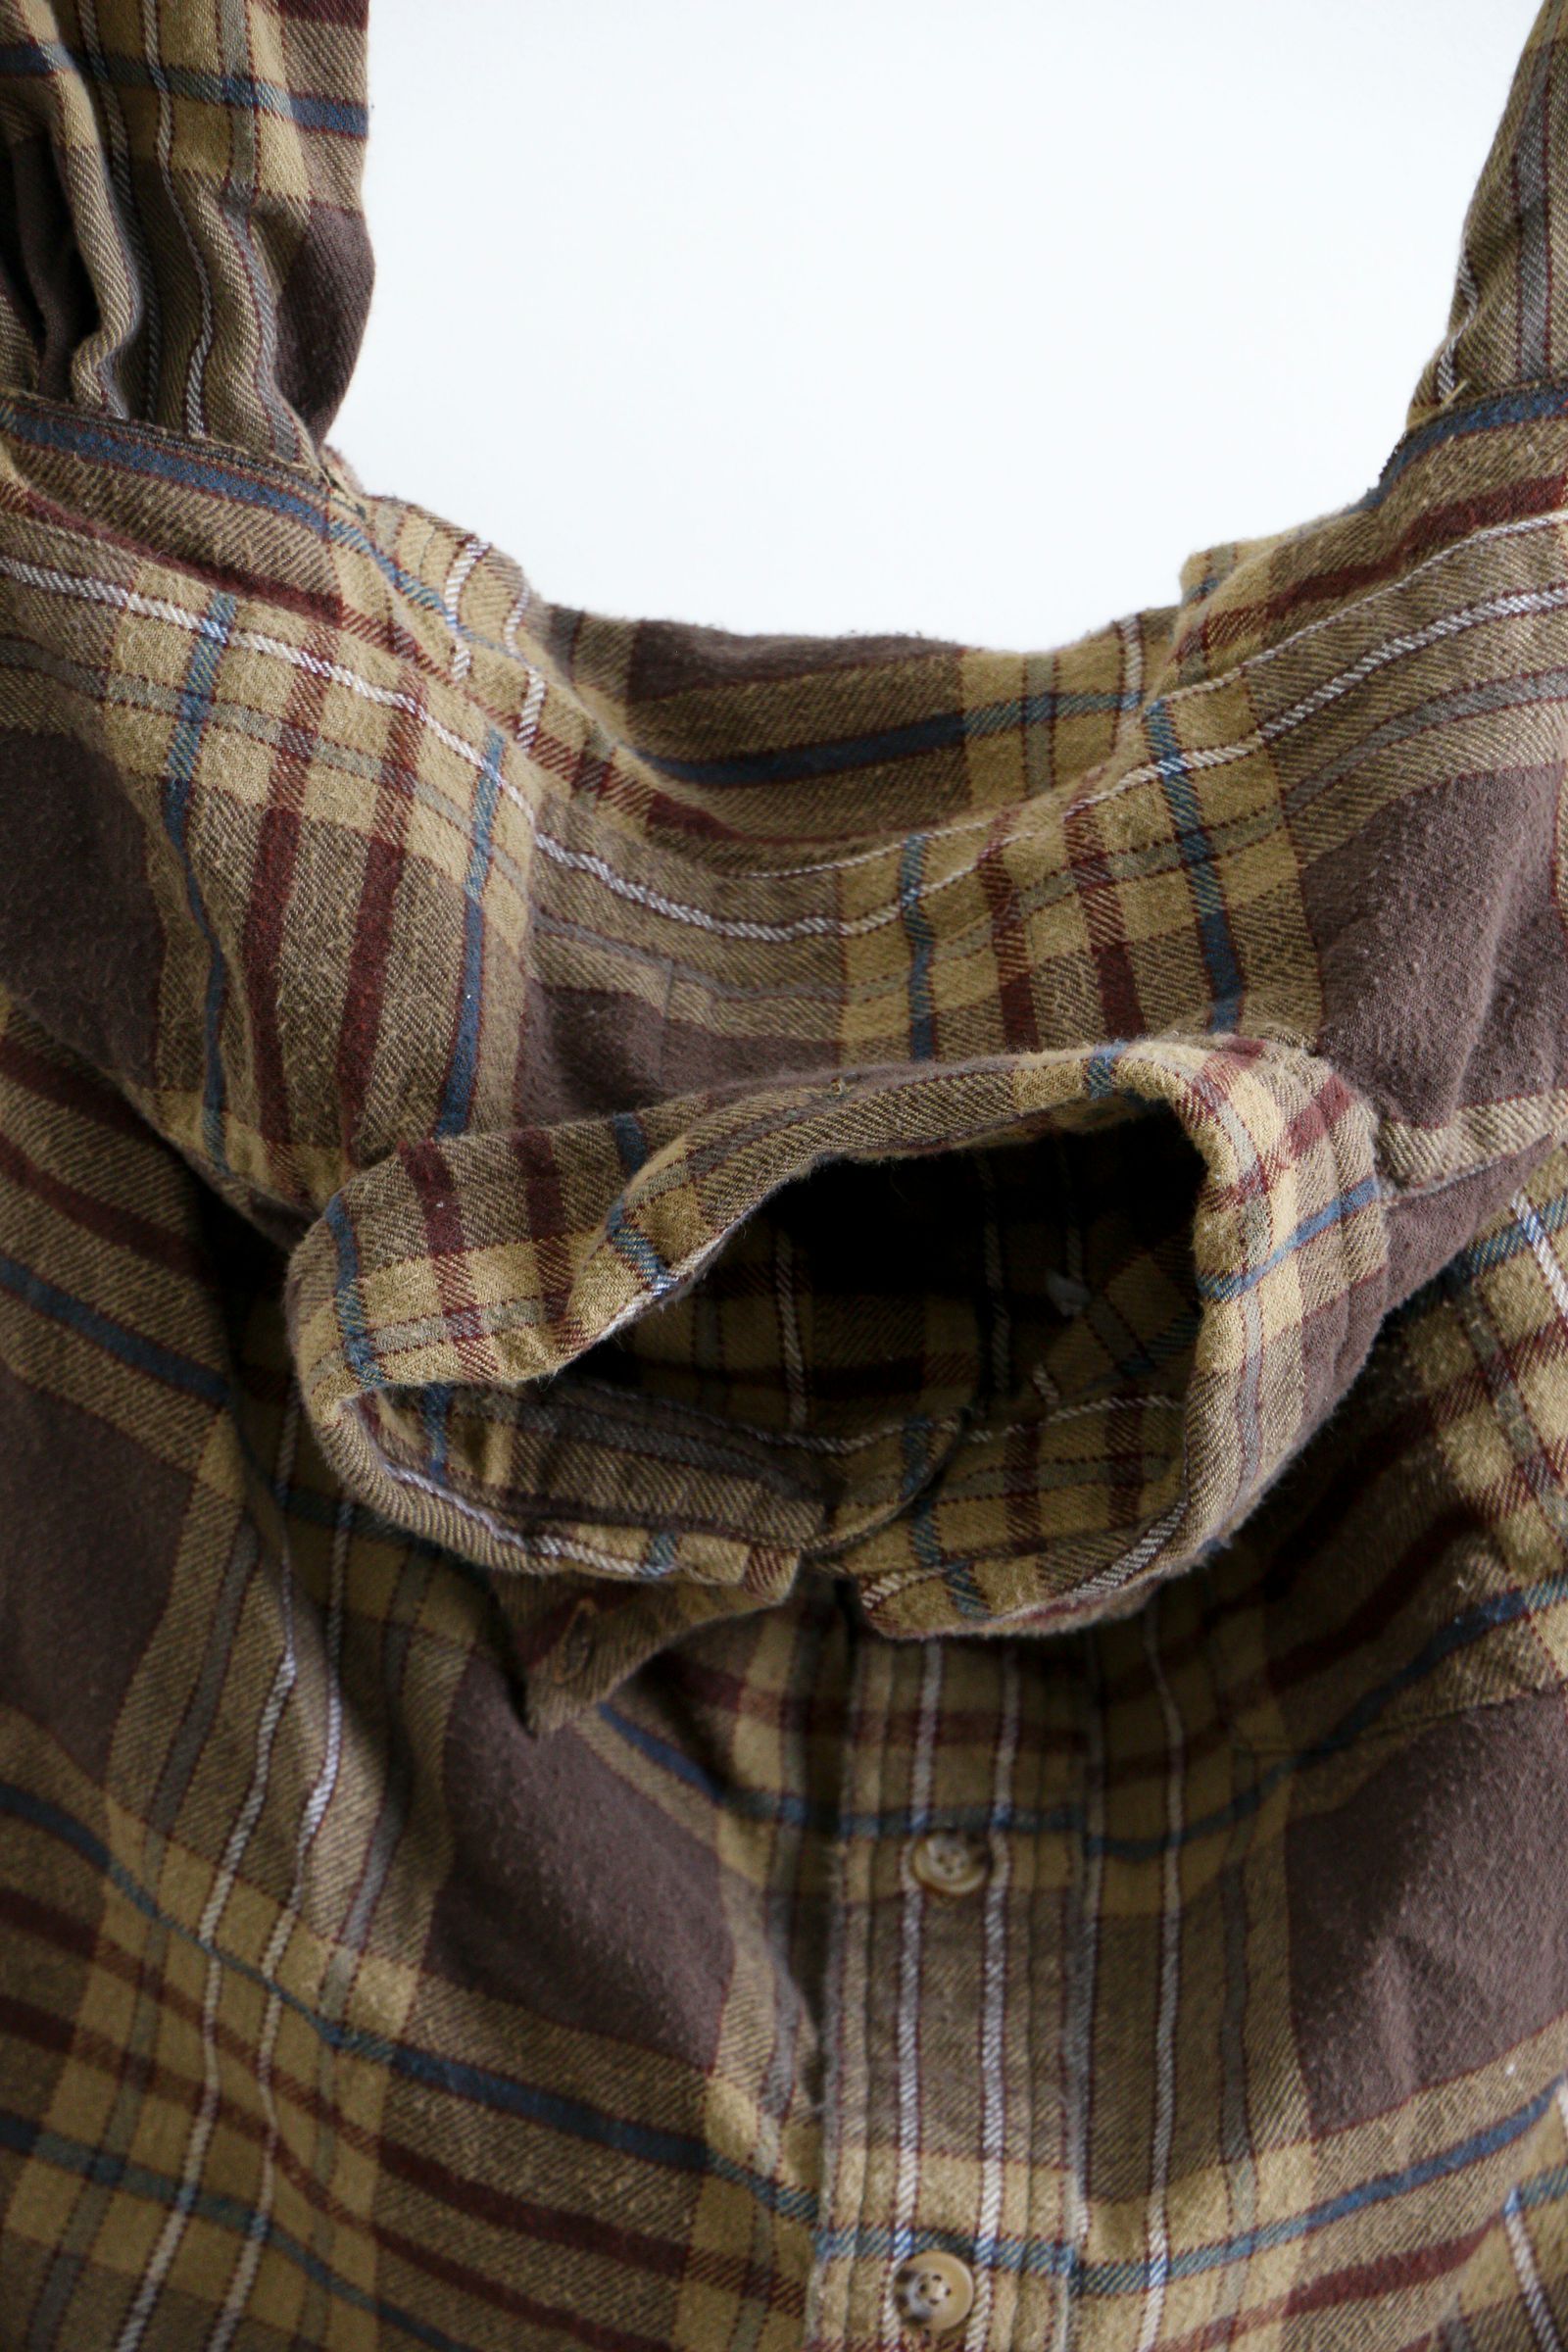 SEVEN BY SEVEN - REWORK SHIRTS BAG - Used flannel shirts - BEIGE